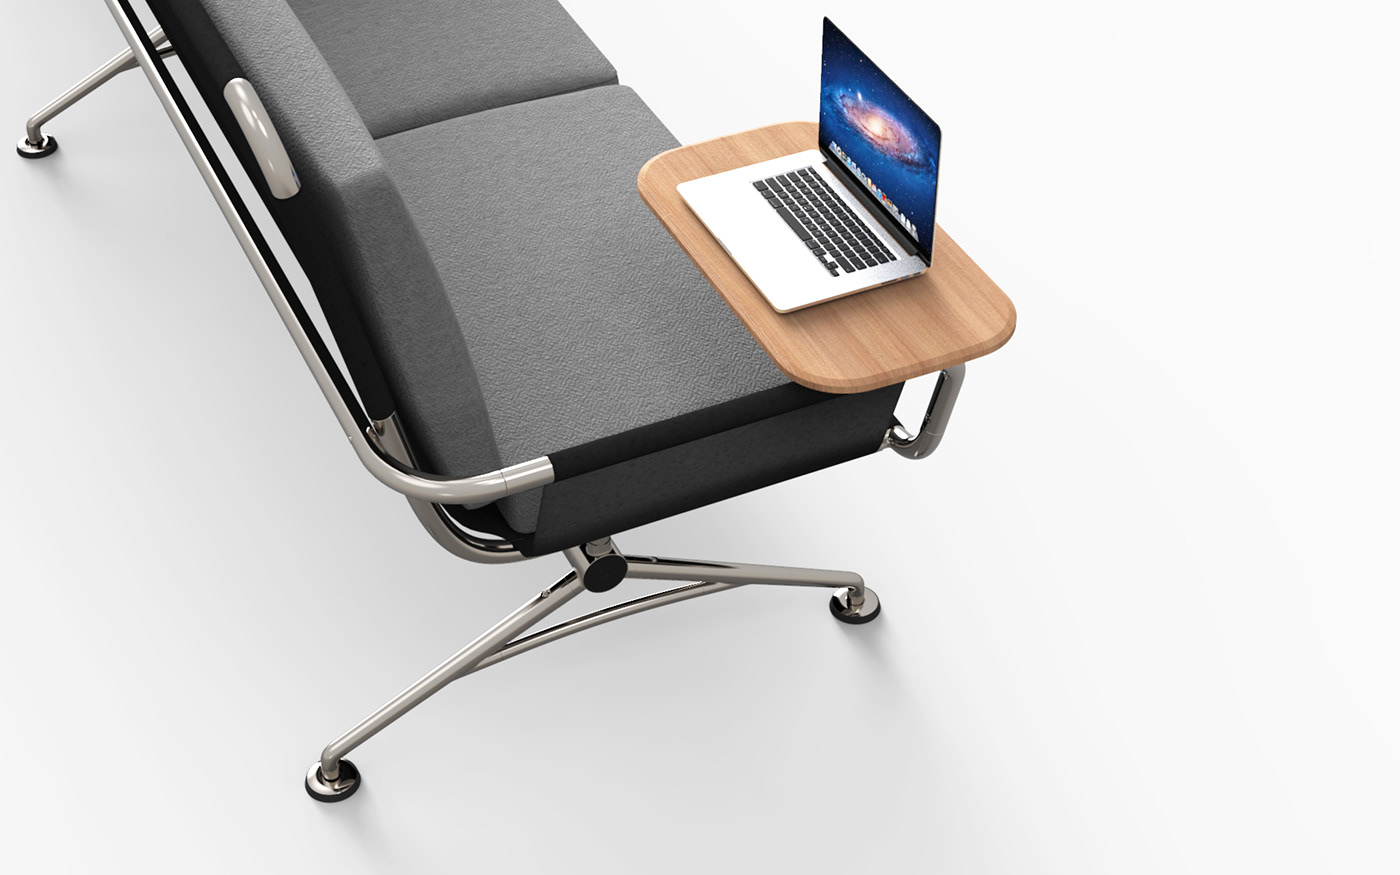 public furniture furniture modularity coworking Airport Lounge Office desk working space seat industrial design 